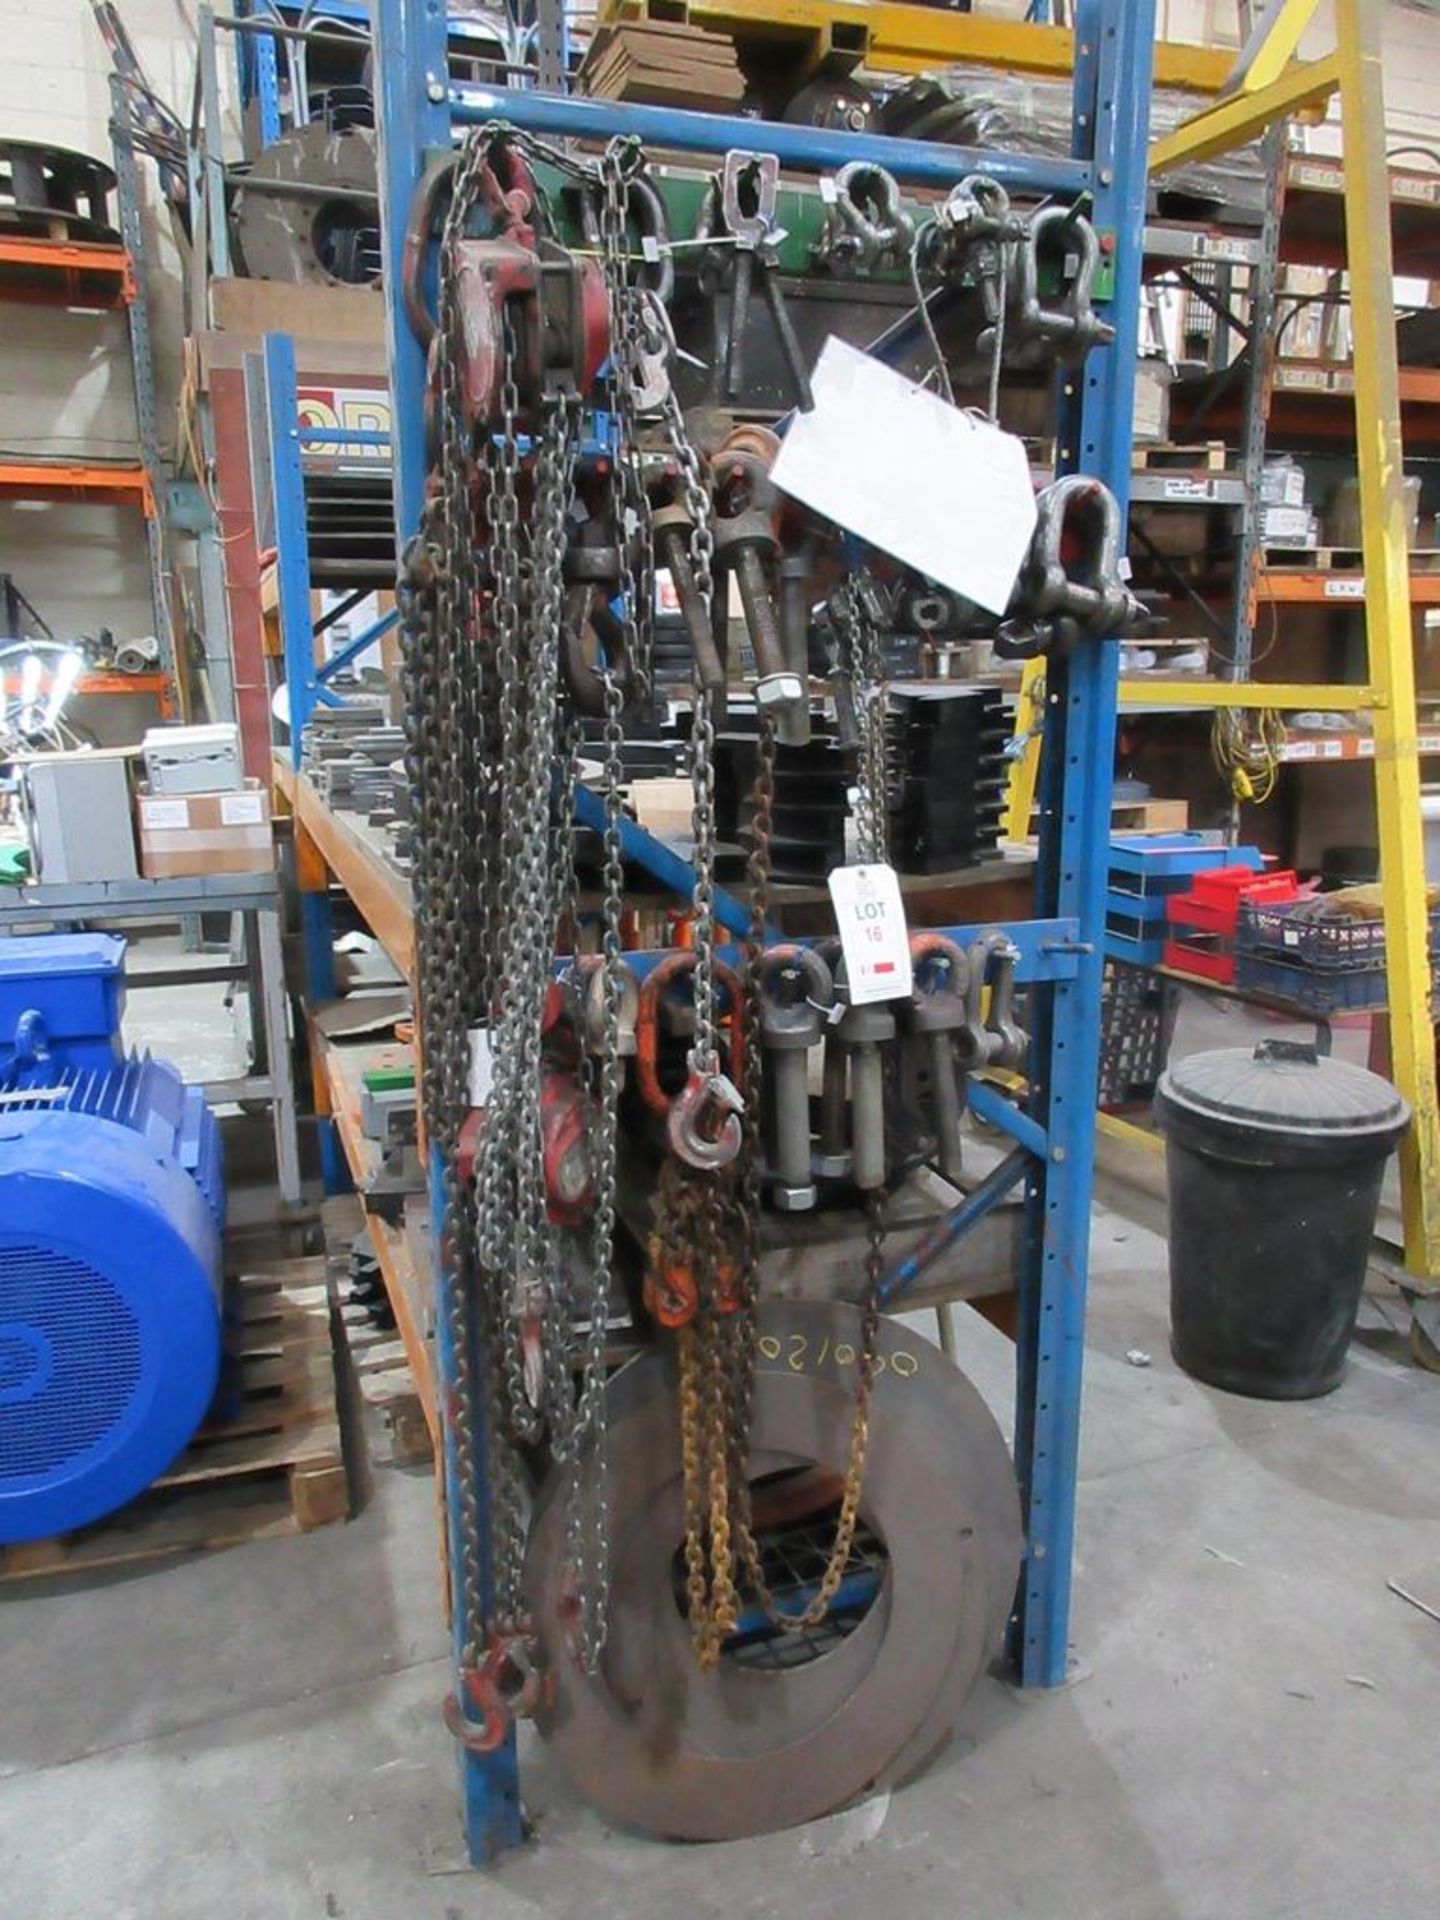 Quantity of assorted lifting chains, hooks, eyelets, Lifting Gear 1 ton chain block NB: This item